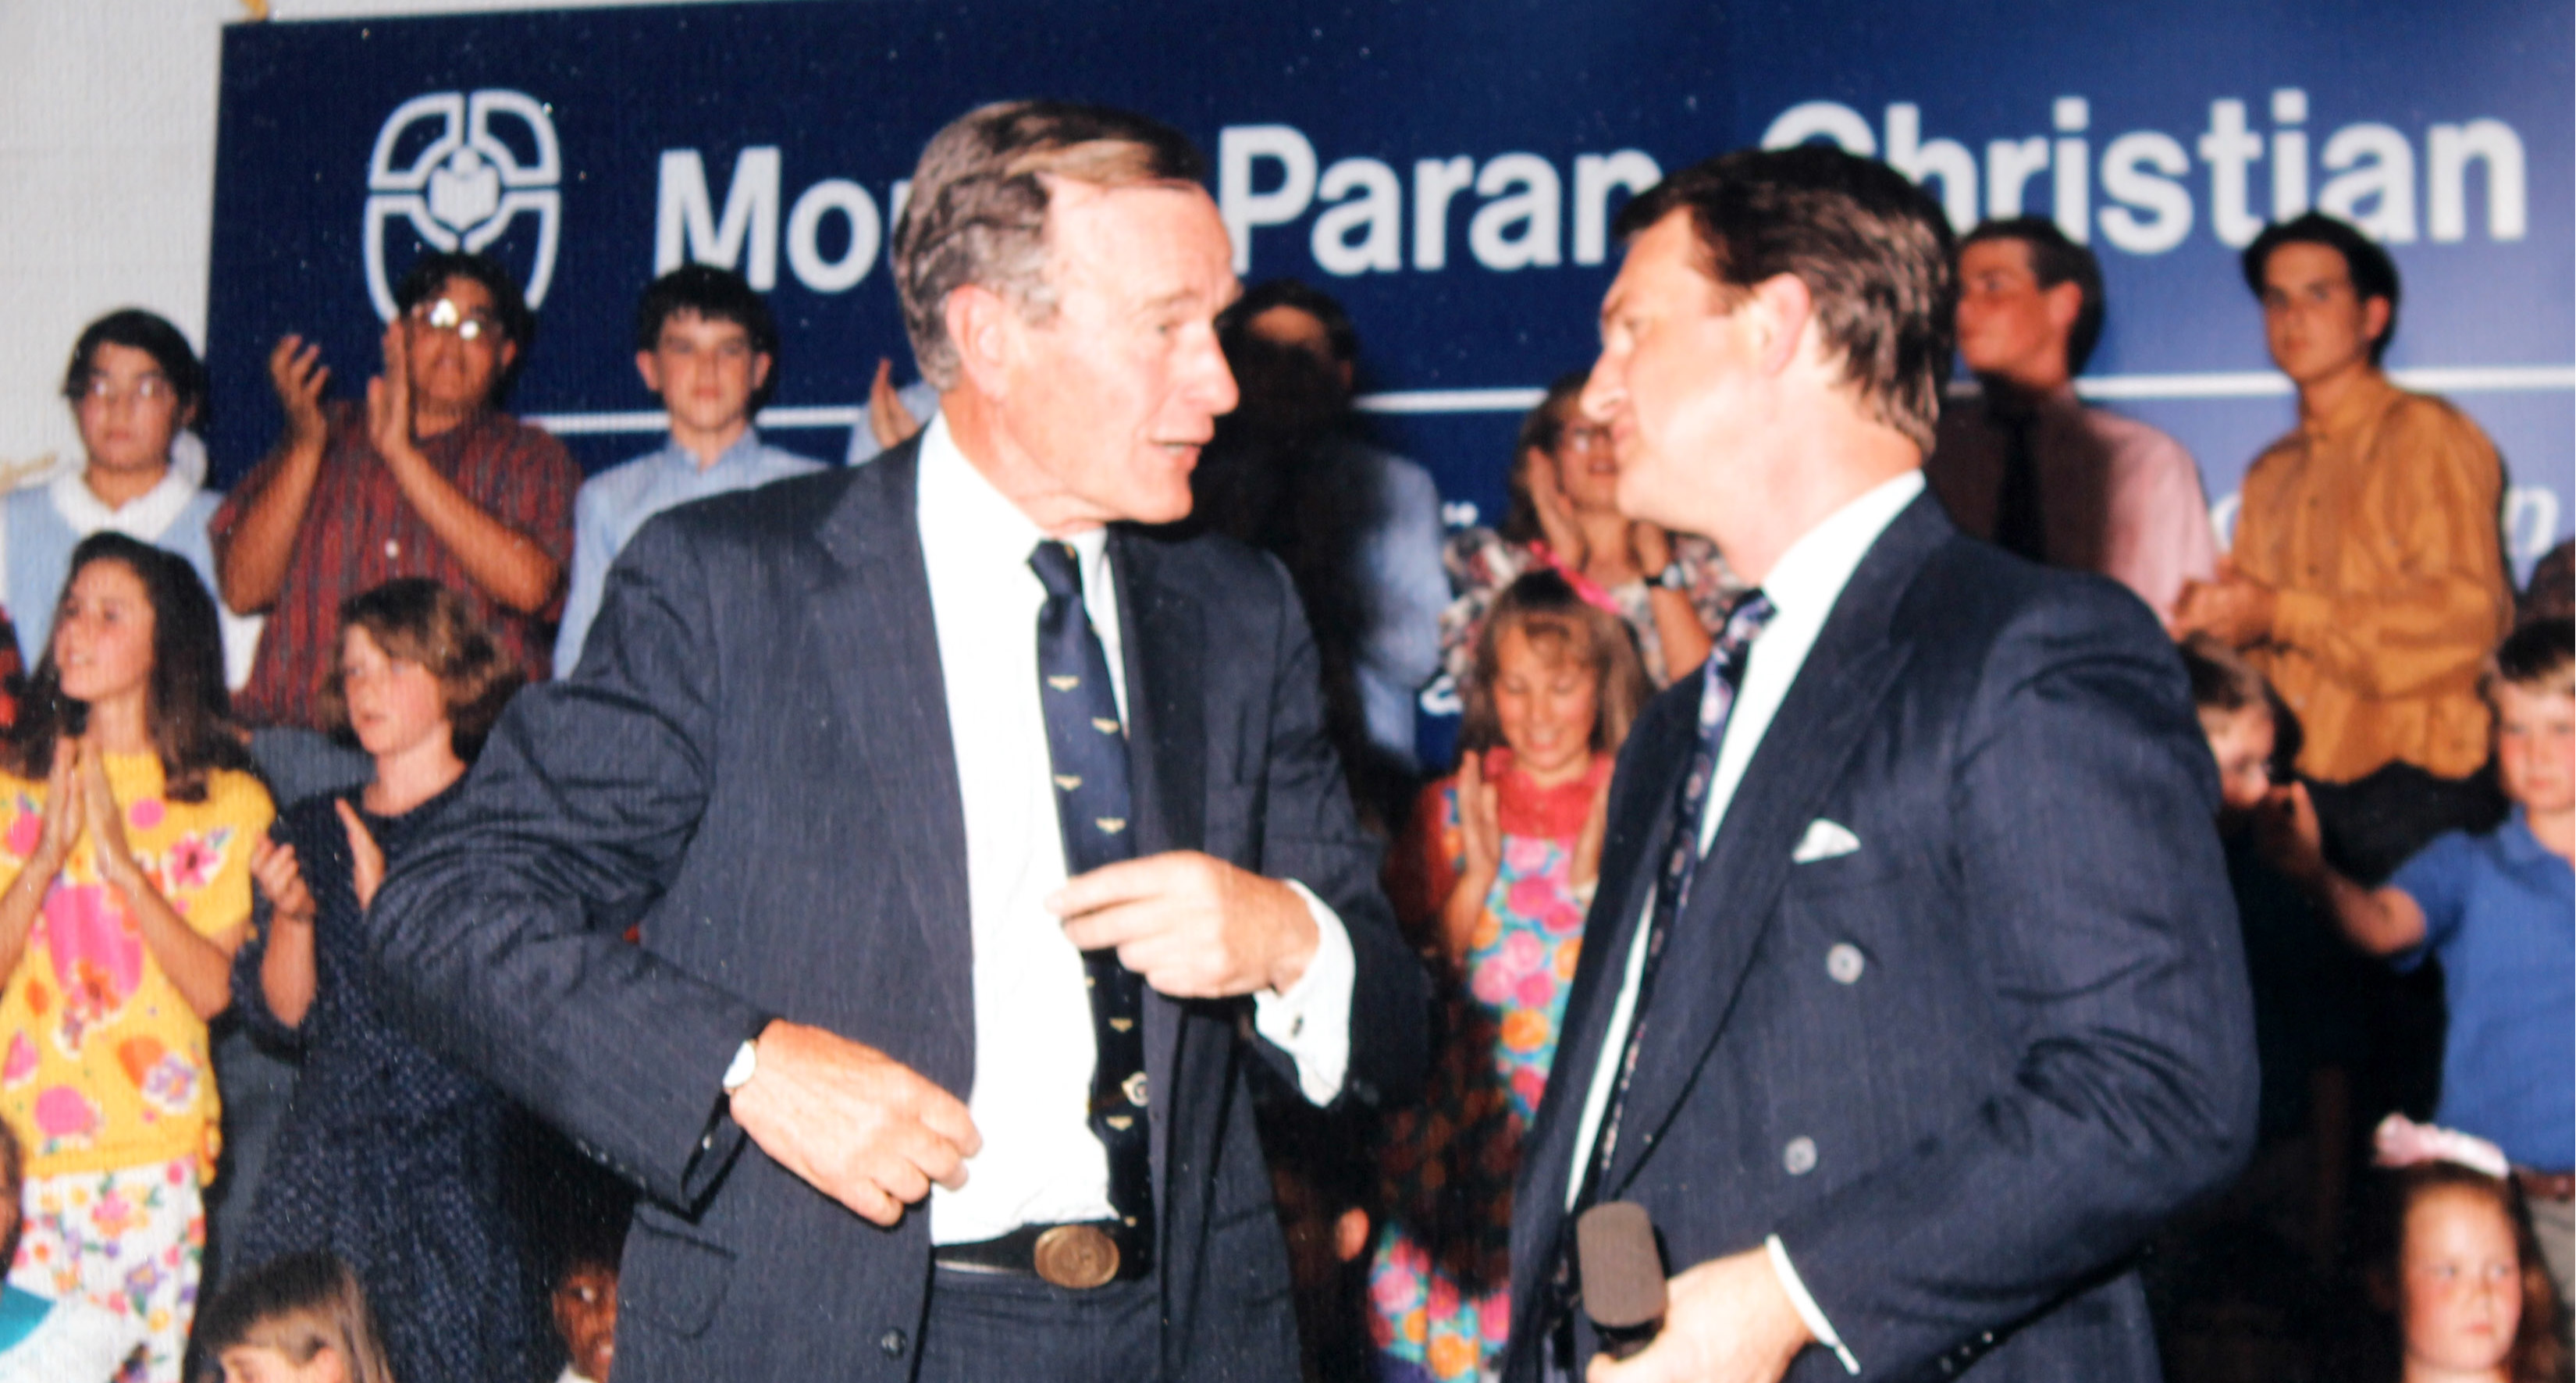 Remembering George H. W. Bush - A Presidential Visit to MPCS